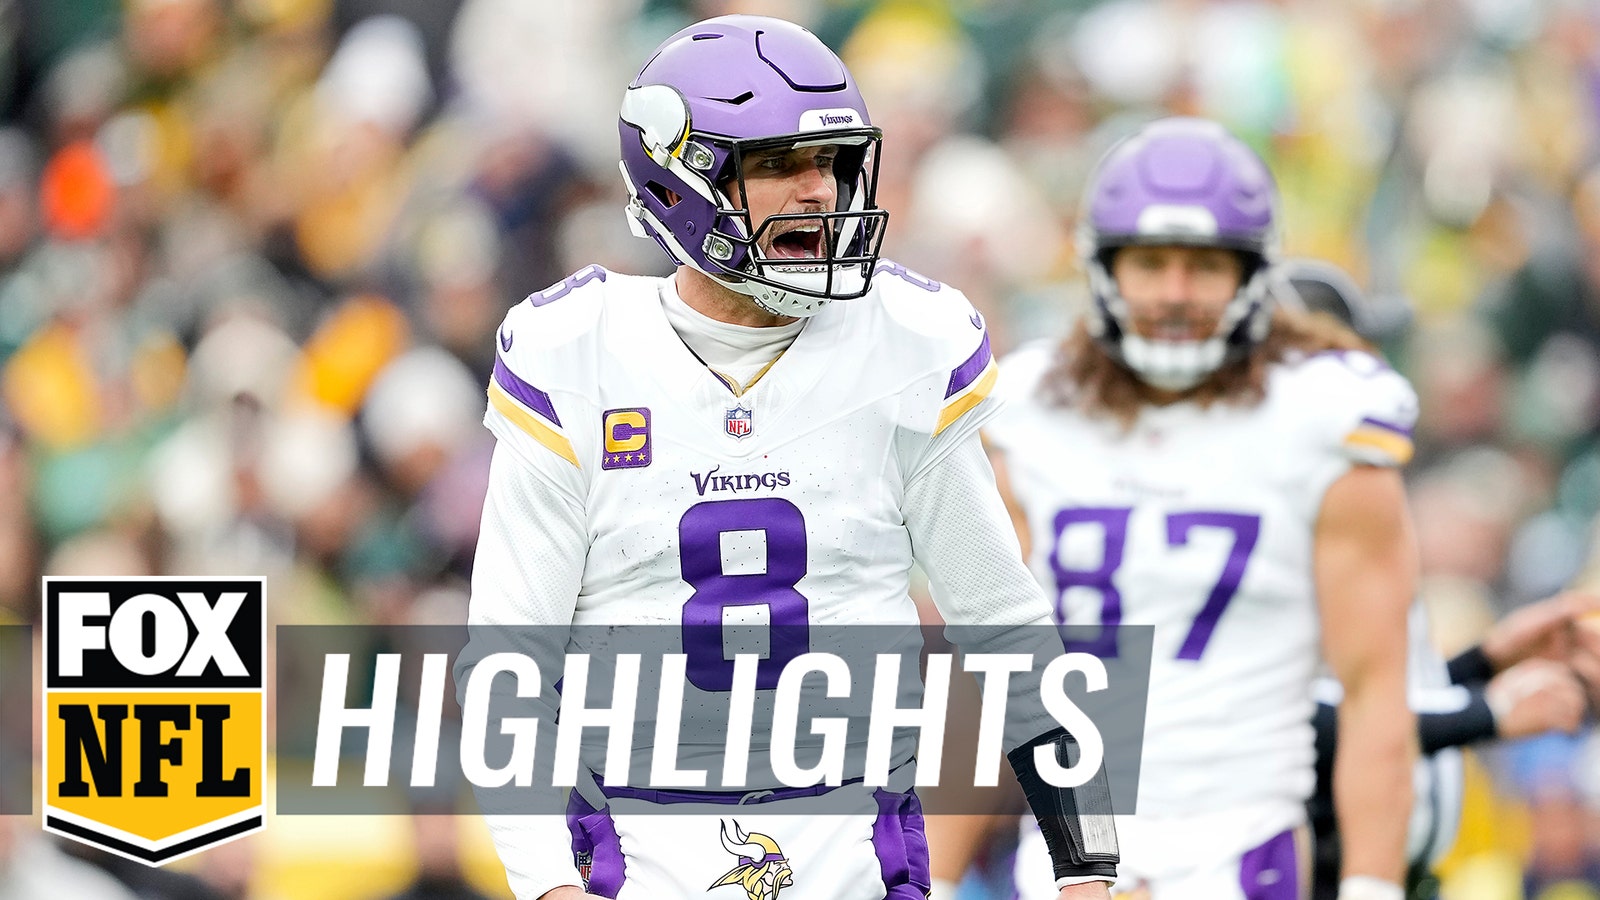 Kirk Cousins records two TDs and 274 yards in Vikings win vs. Packers before leaving with an injury